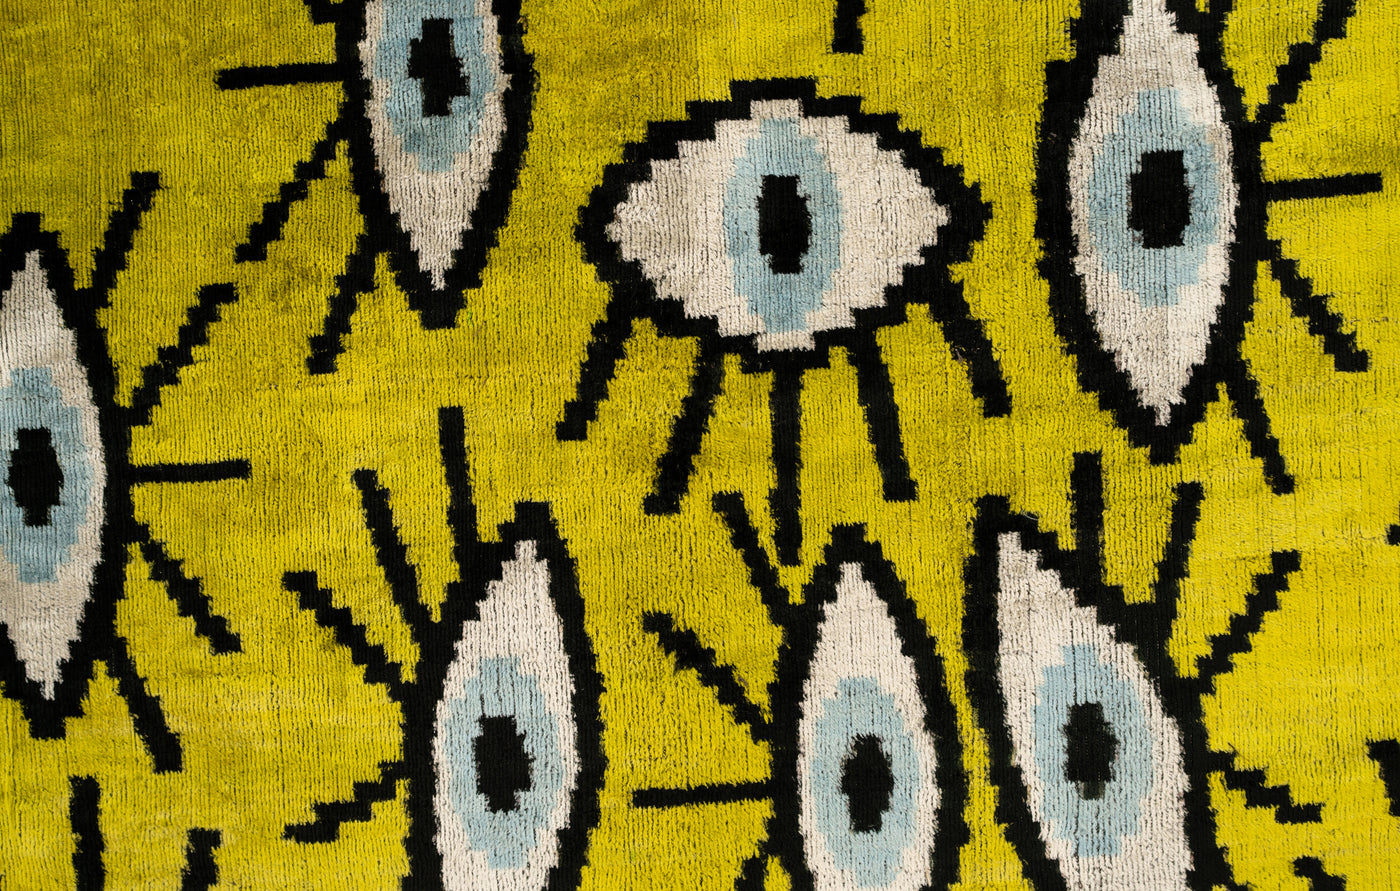 Handmade Yellowish Eye Design Throw Pillow - 16x24 inch, Vegetable Dyed with Premium Down Feather Insert